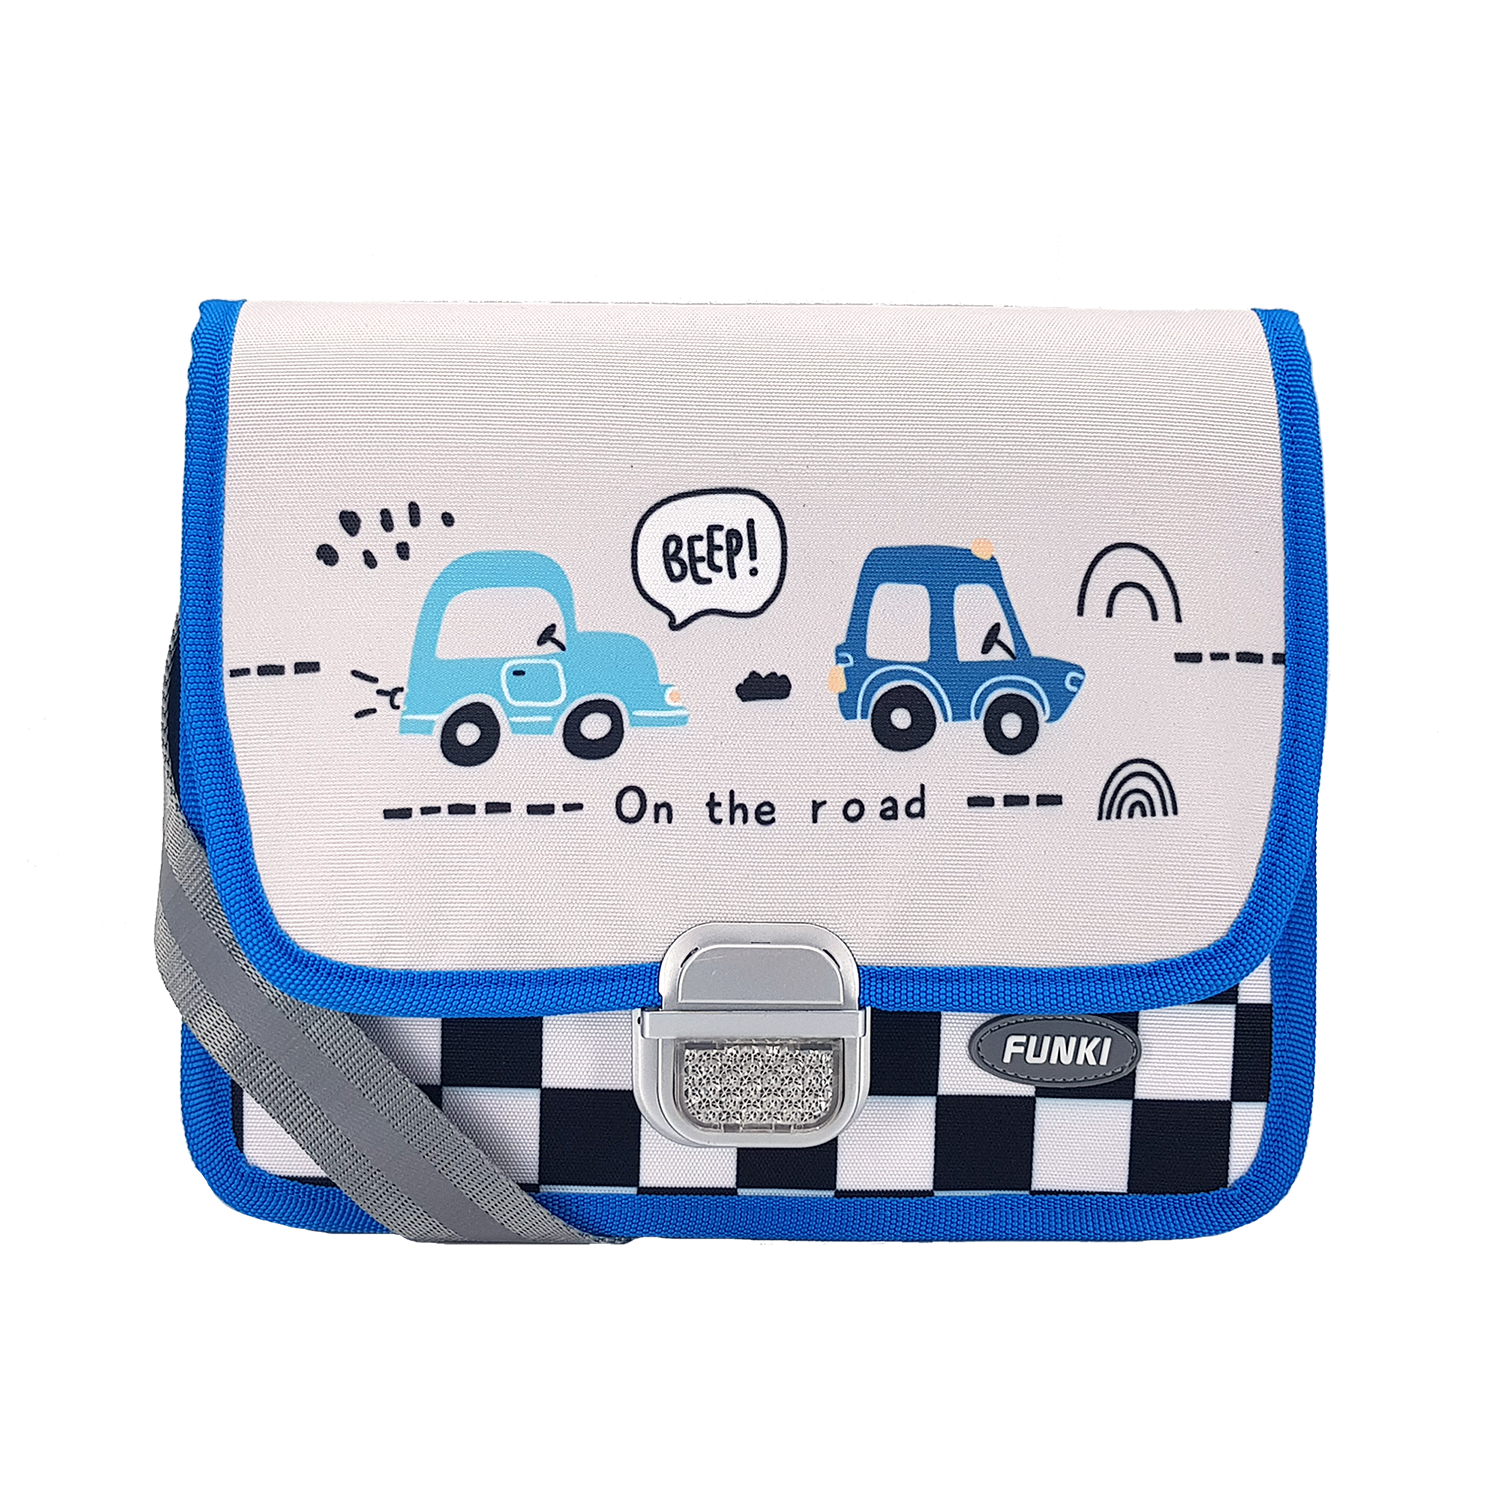 FUNKI Sac maternelle On the Road 6020.039 multicolor 265x200x70mm